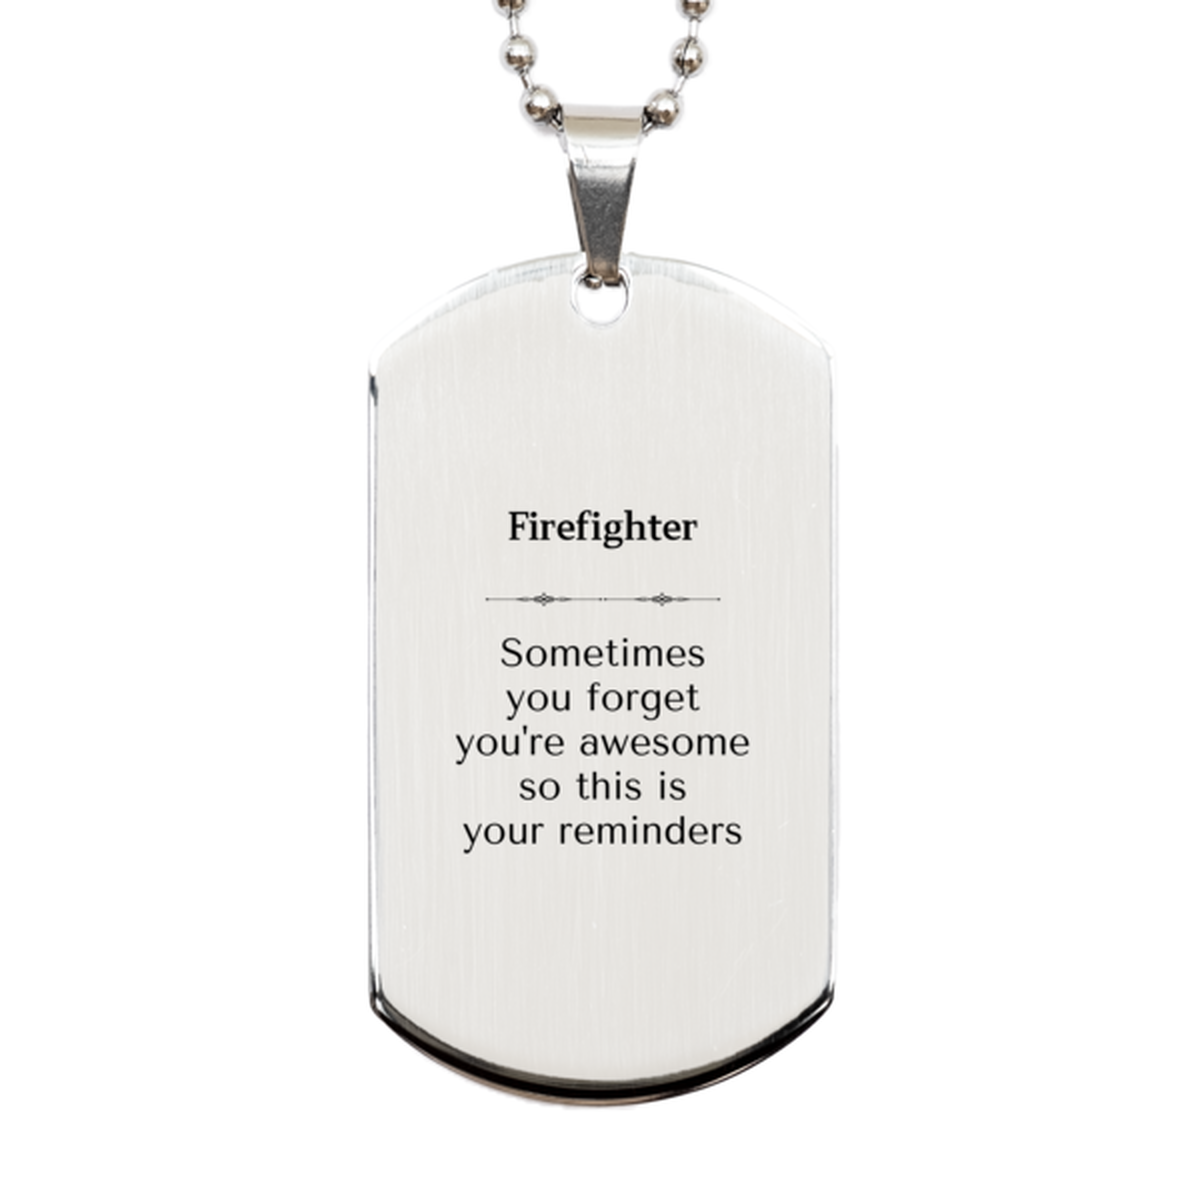 Sentimental Firefighter Silver Dog Tag, Firefighter Sometimes you forget you're awesome so this is your reminders, Graduation Christmas Birthday Gifts for Firefighter, Men, Women, Coworkers